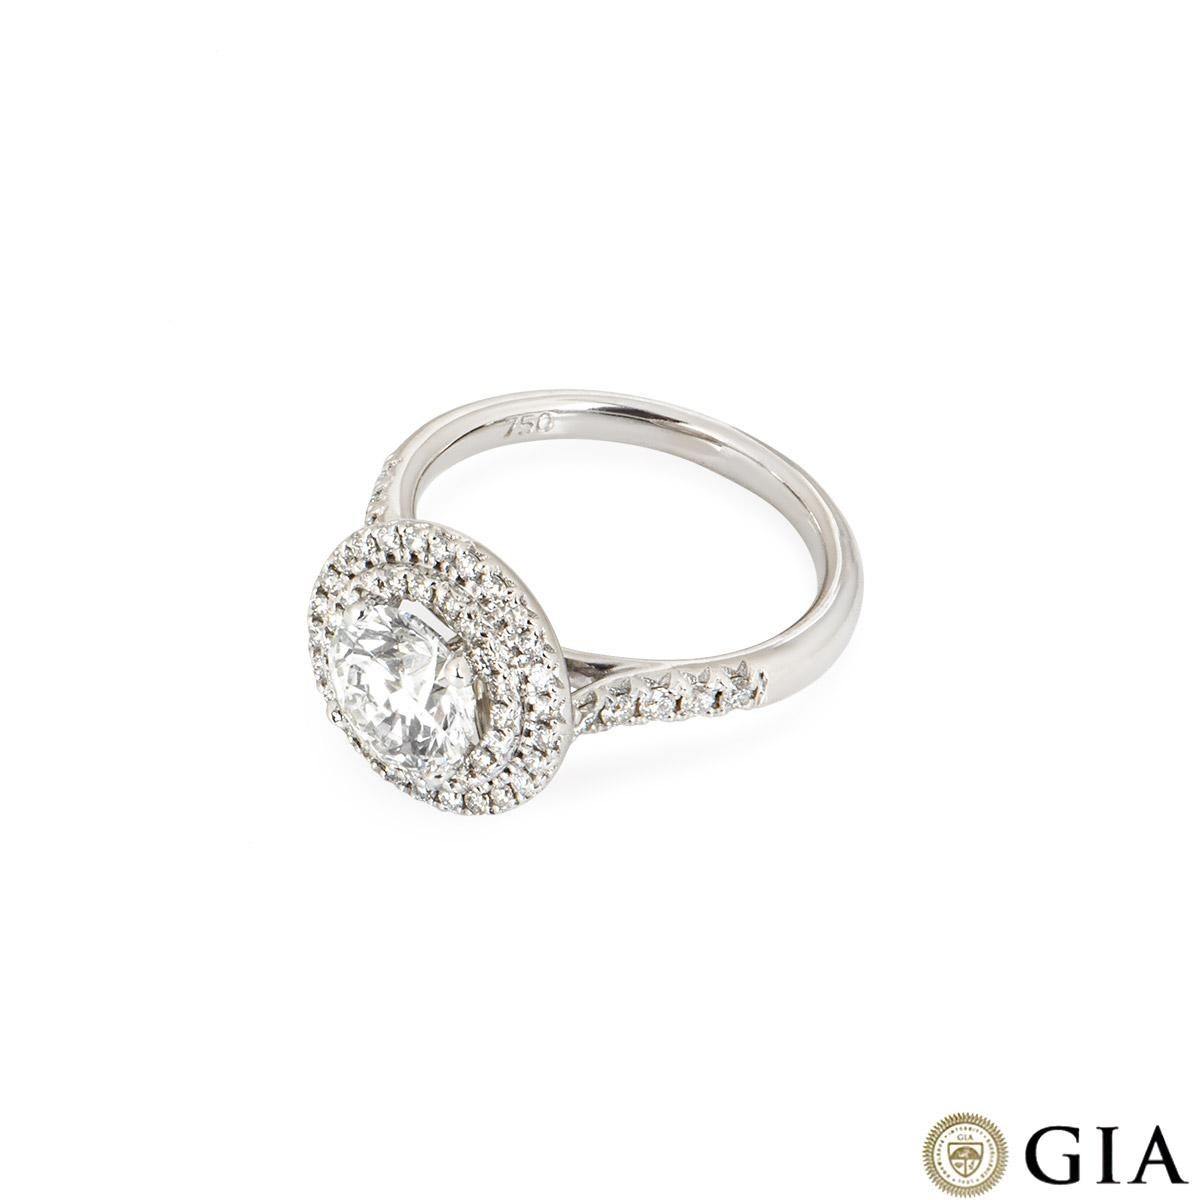 GIA White Gold Round Brilliant Cut Diamond Ring 1.58ct Faint Yellow-Green/VS2 In New Condition For Sale In London, GB